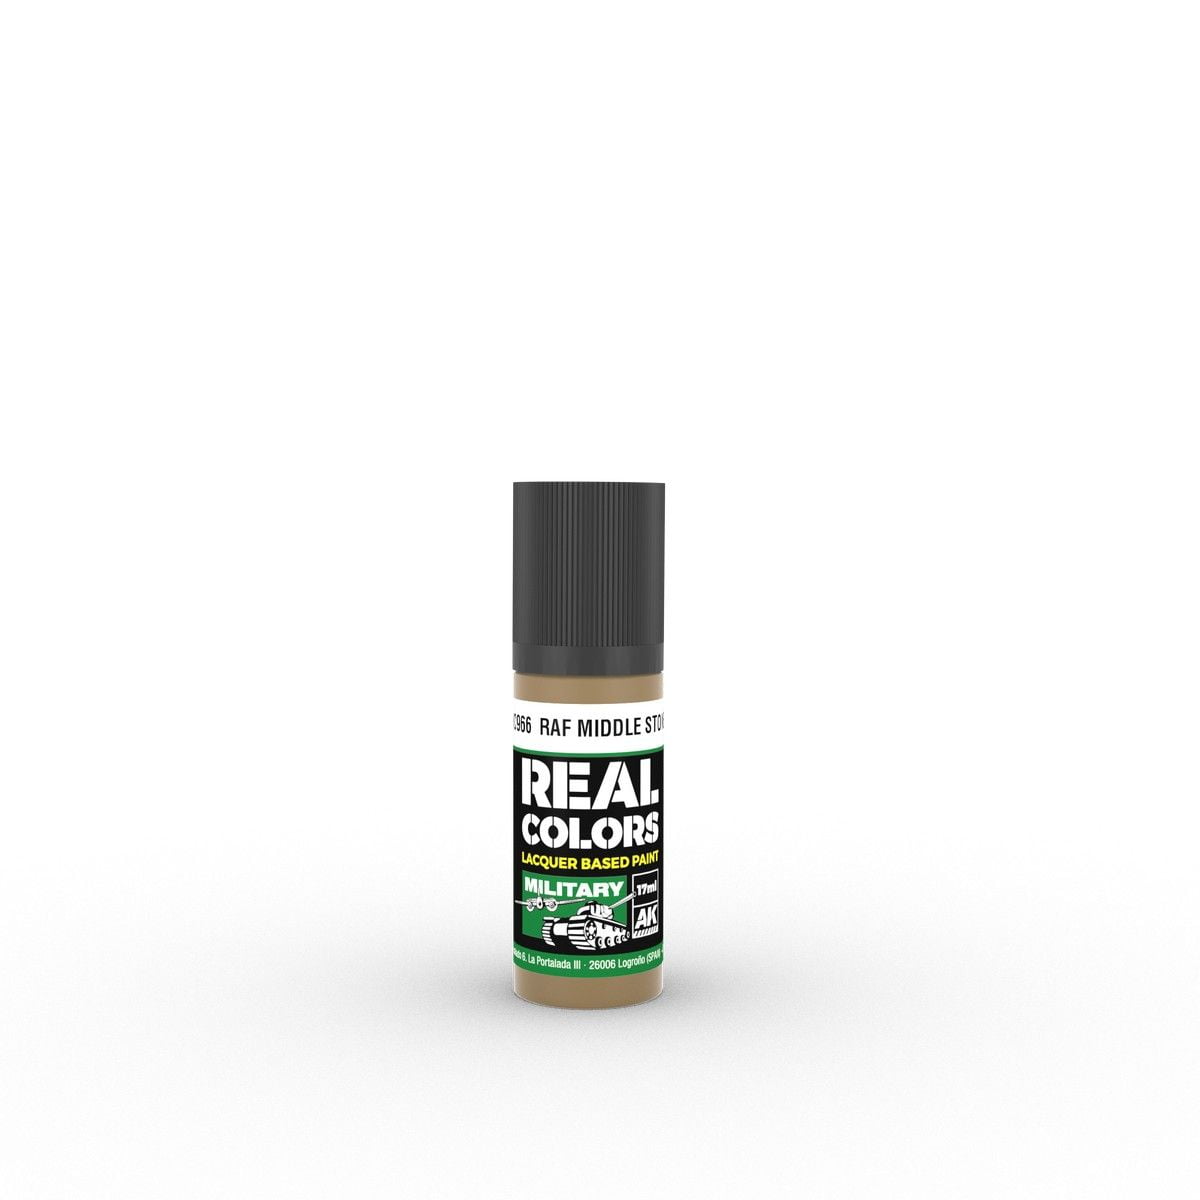 Real Colors Military: RAF Middle Stone 17ml